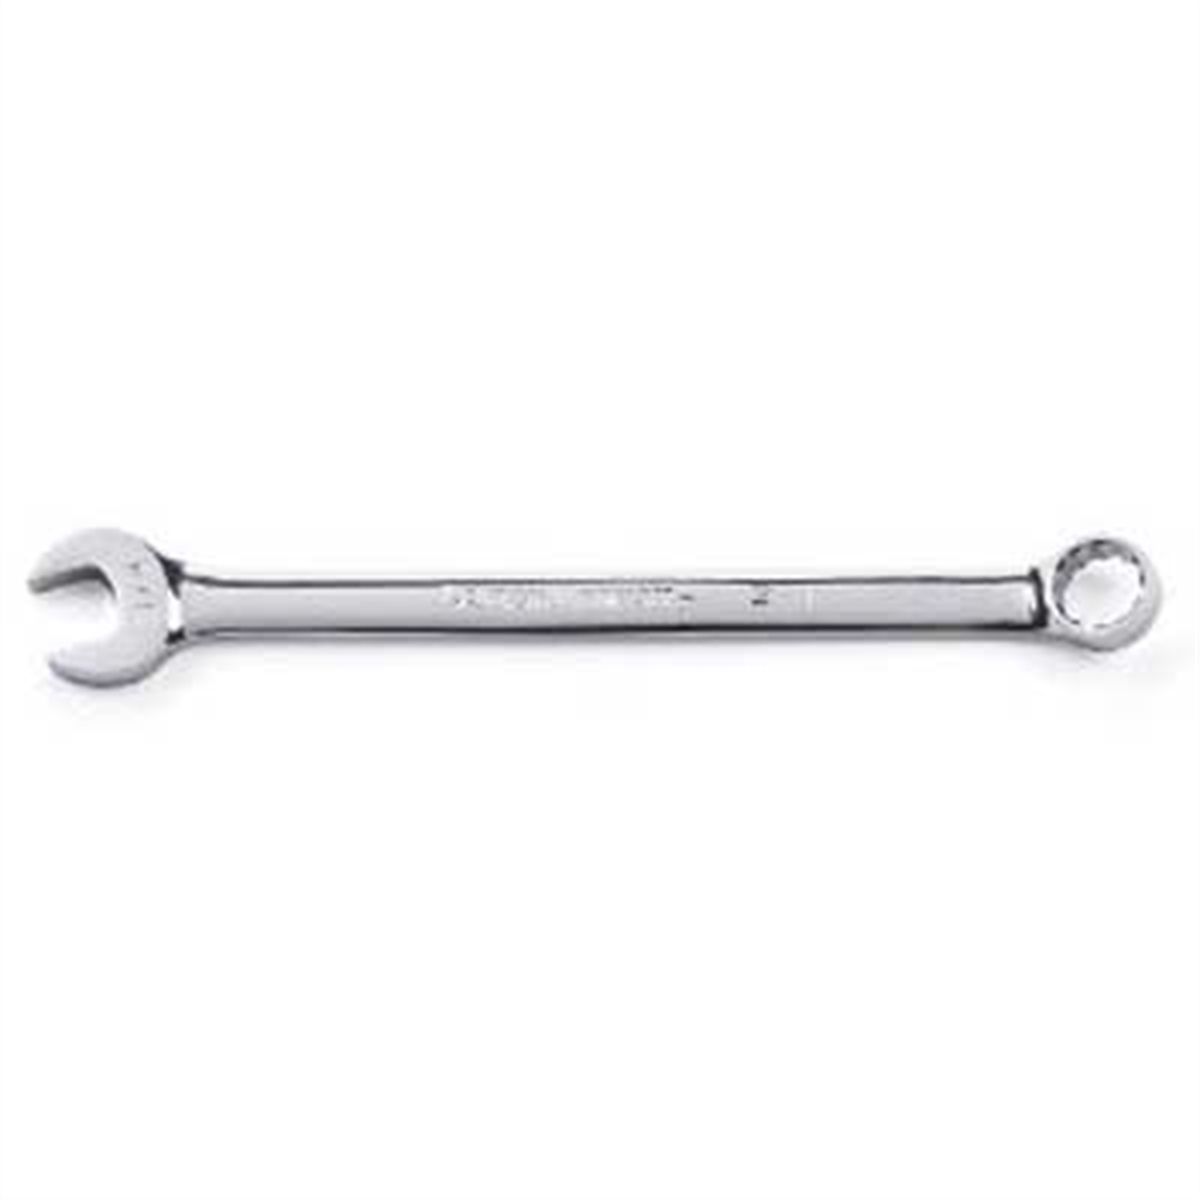 27 mm Long Pattern Combination Wrench